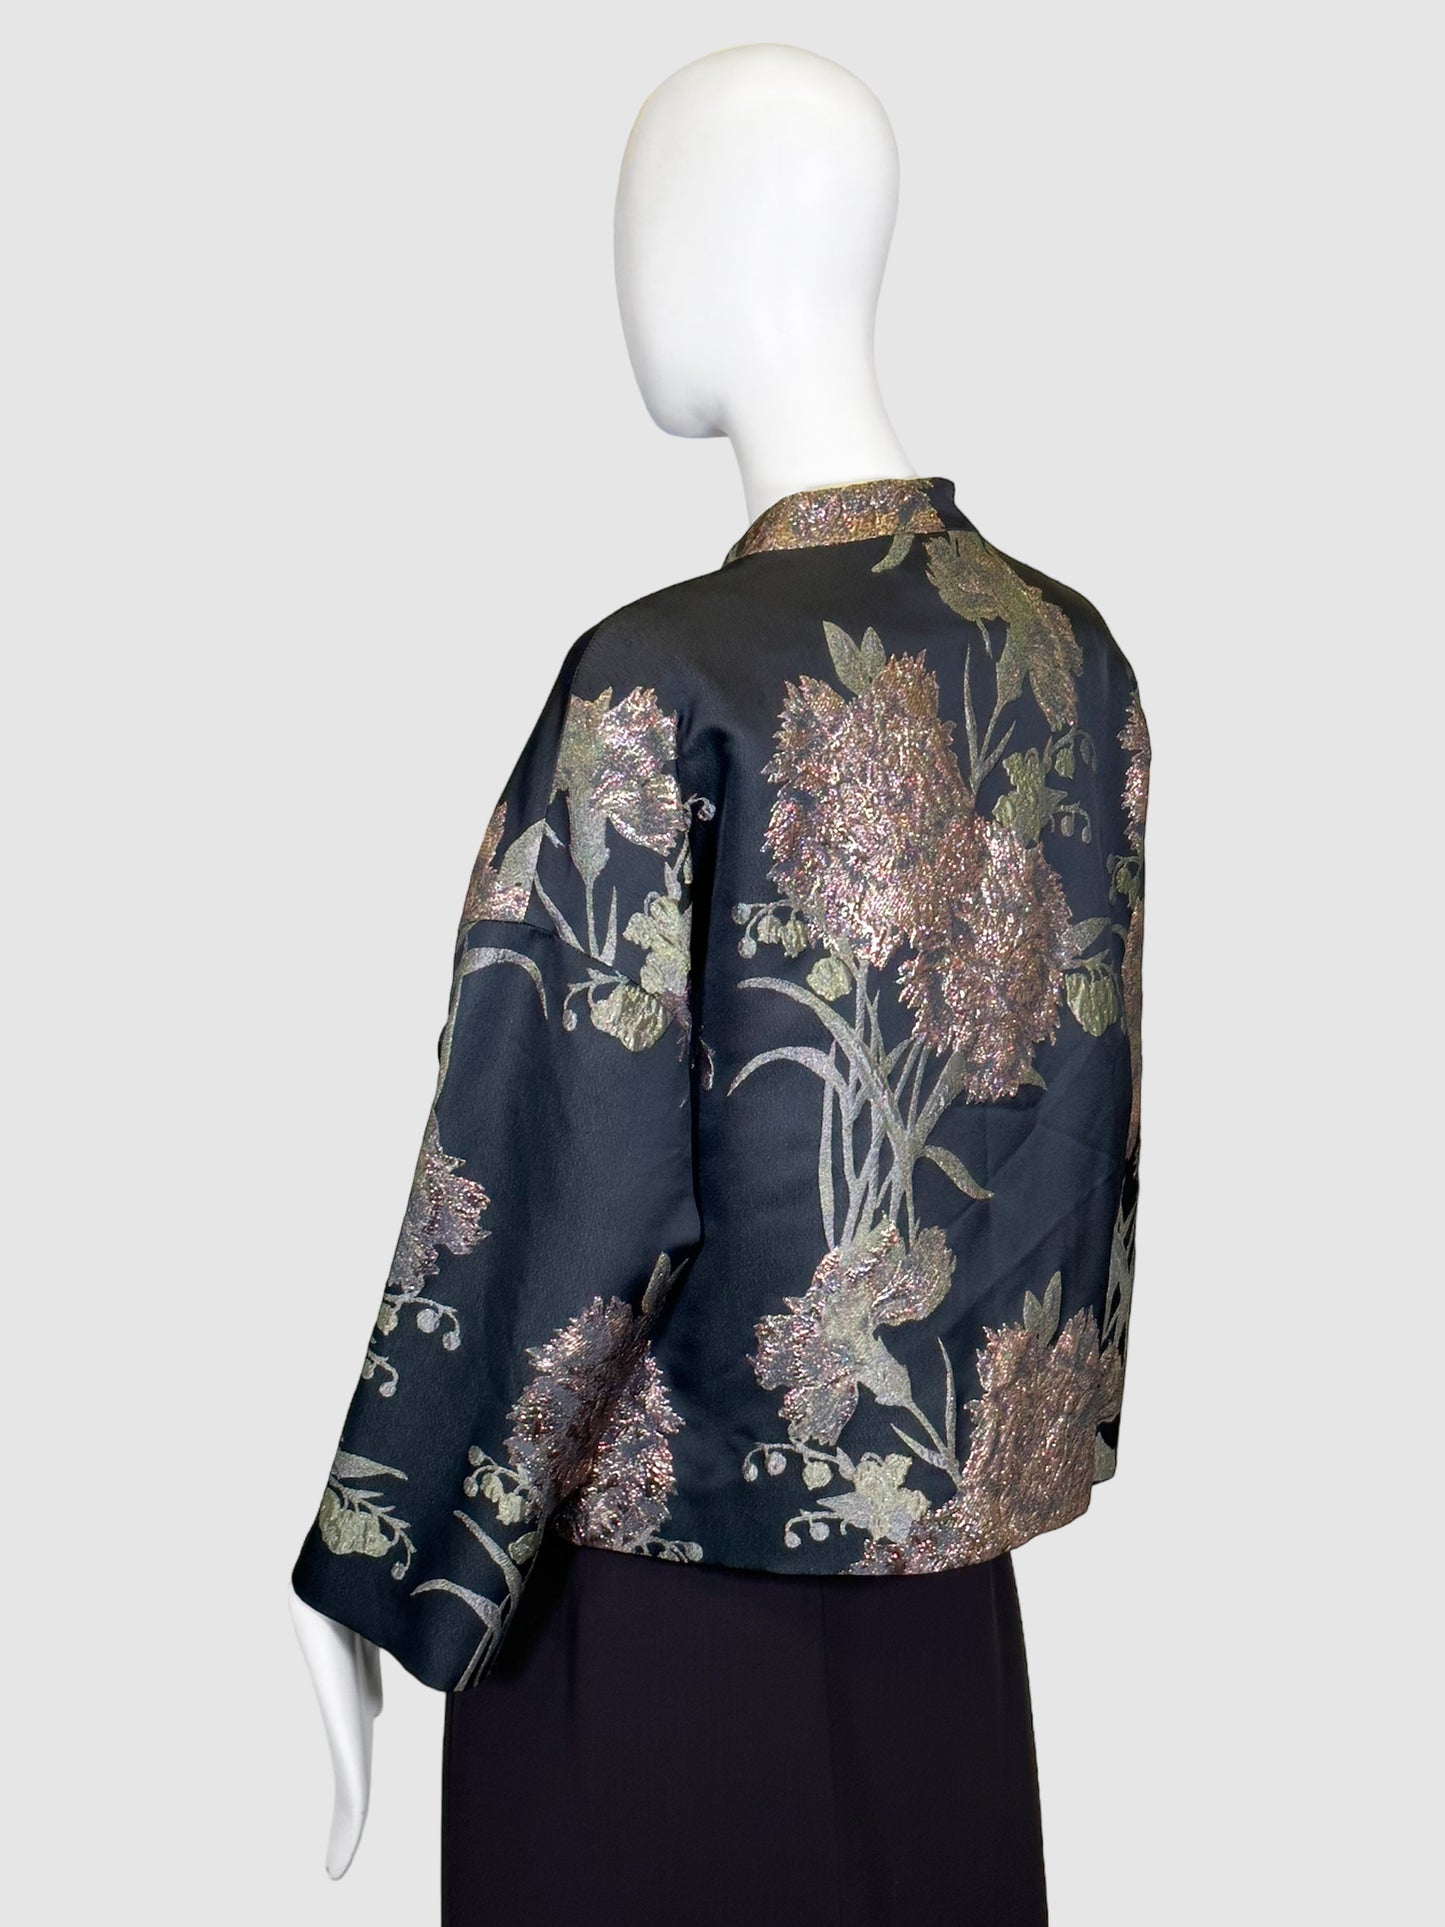 Max Volmary Shimmery Floral Pattern Jacket - Size 38